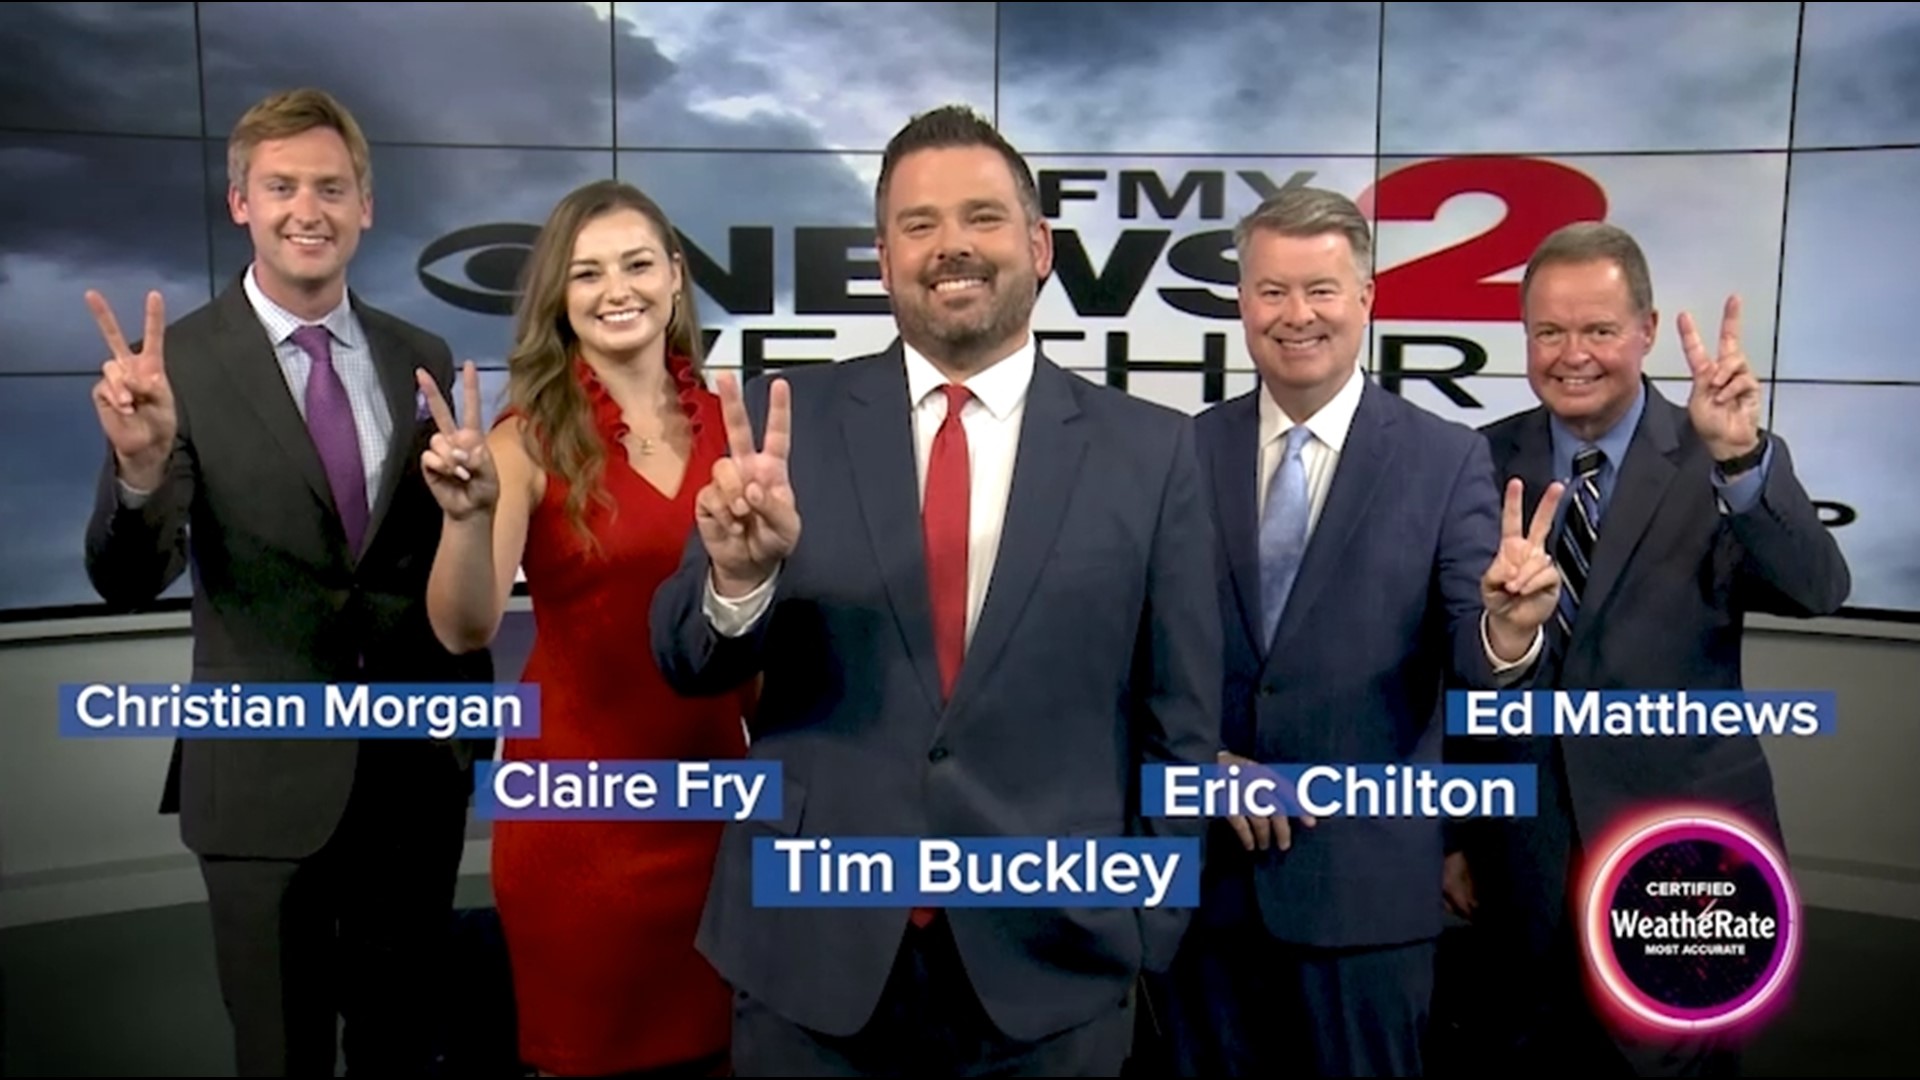 Meet the newest member of the WFMY News 2 Weather Team, Claire Fry